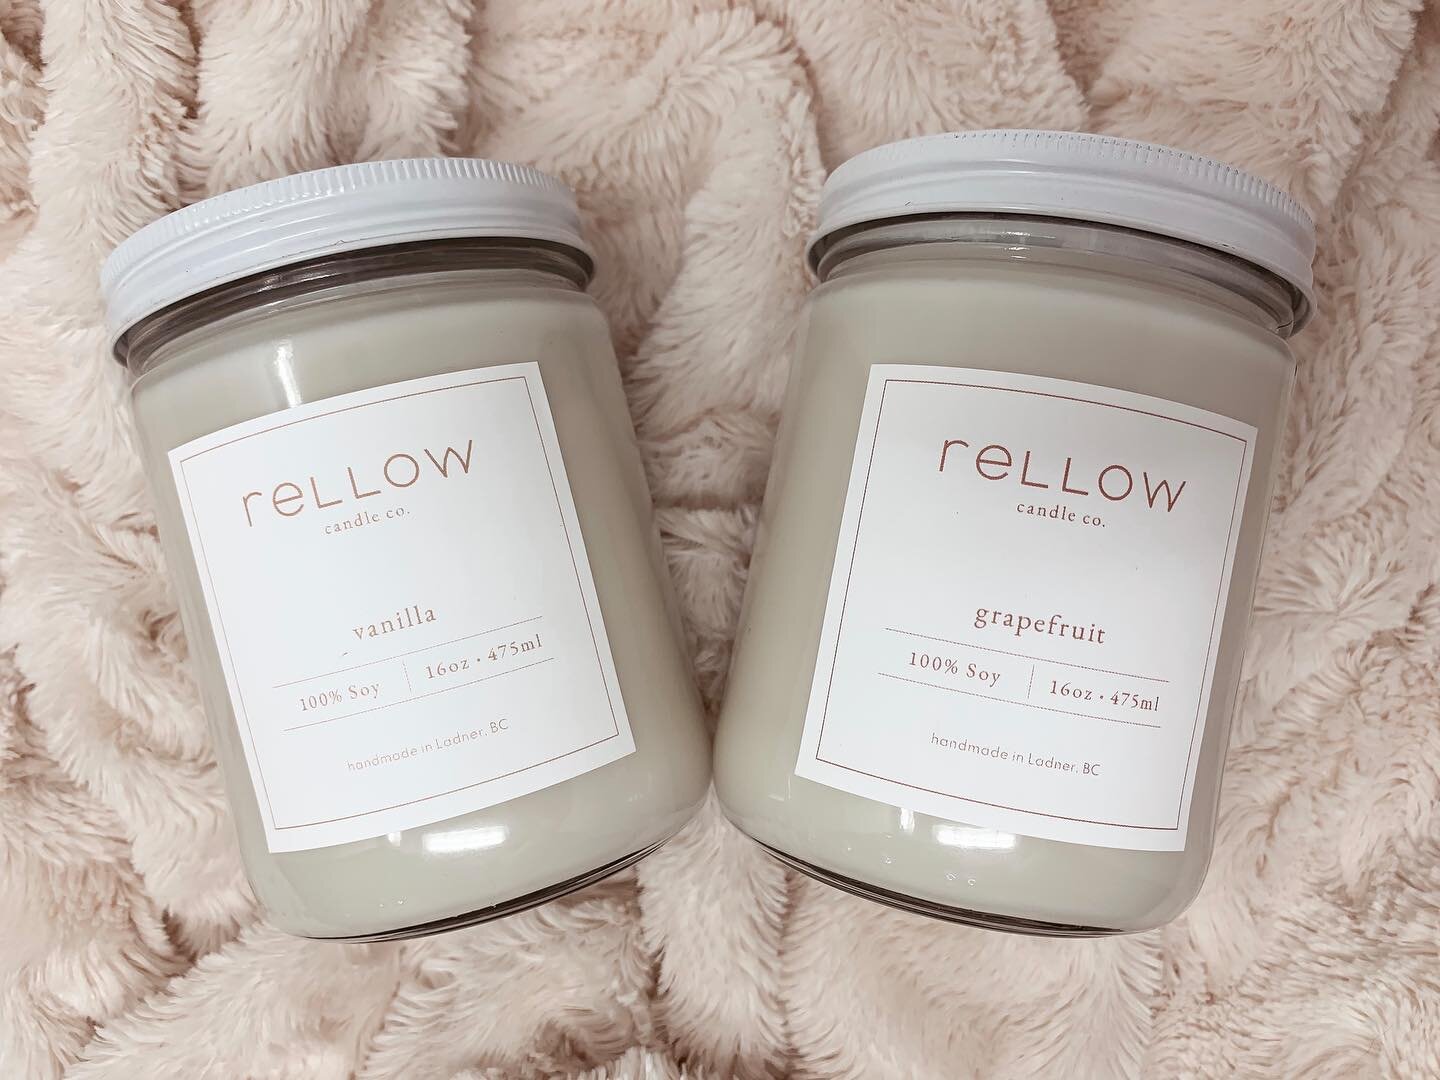 Candle season is approaching, luckily we&rsquo;ve got you covered with our all soy candles! Coming very soon! Can you tell that I&rsquo;m excited?? #soycandles #candlesofinstagram #candles #rellowcandleco #candleseason #burnbabyburn